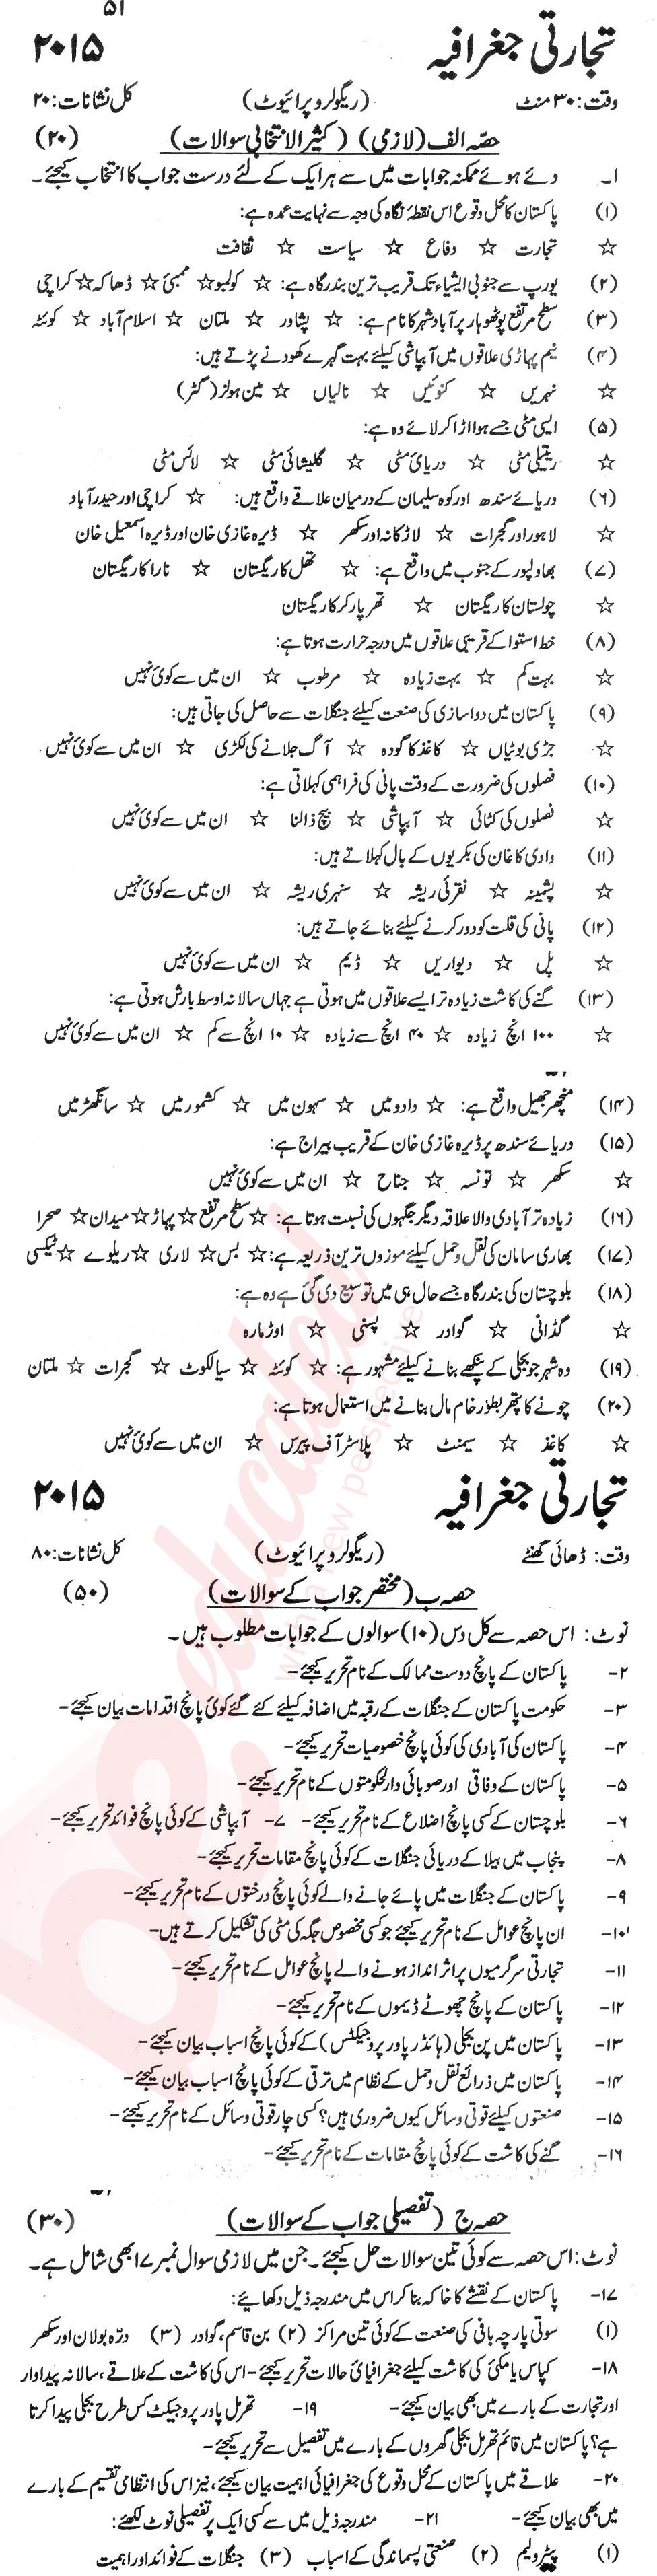 Commercial Geography 10th Urdu Medium Past Paper Group 1 KPBTE 2015